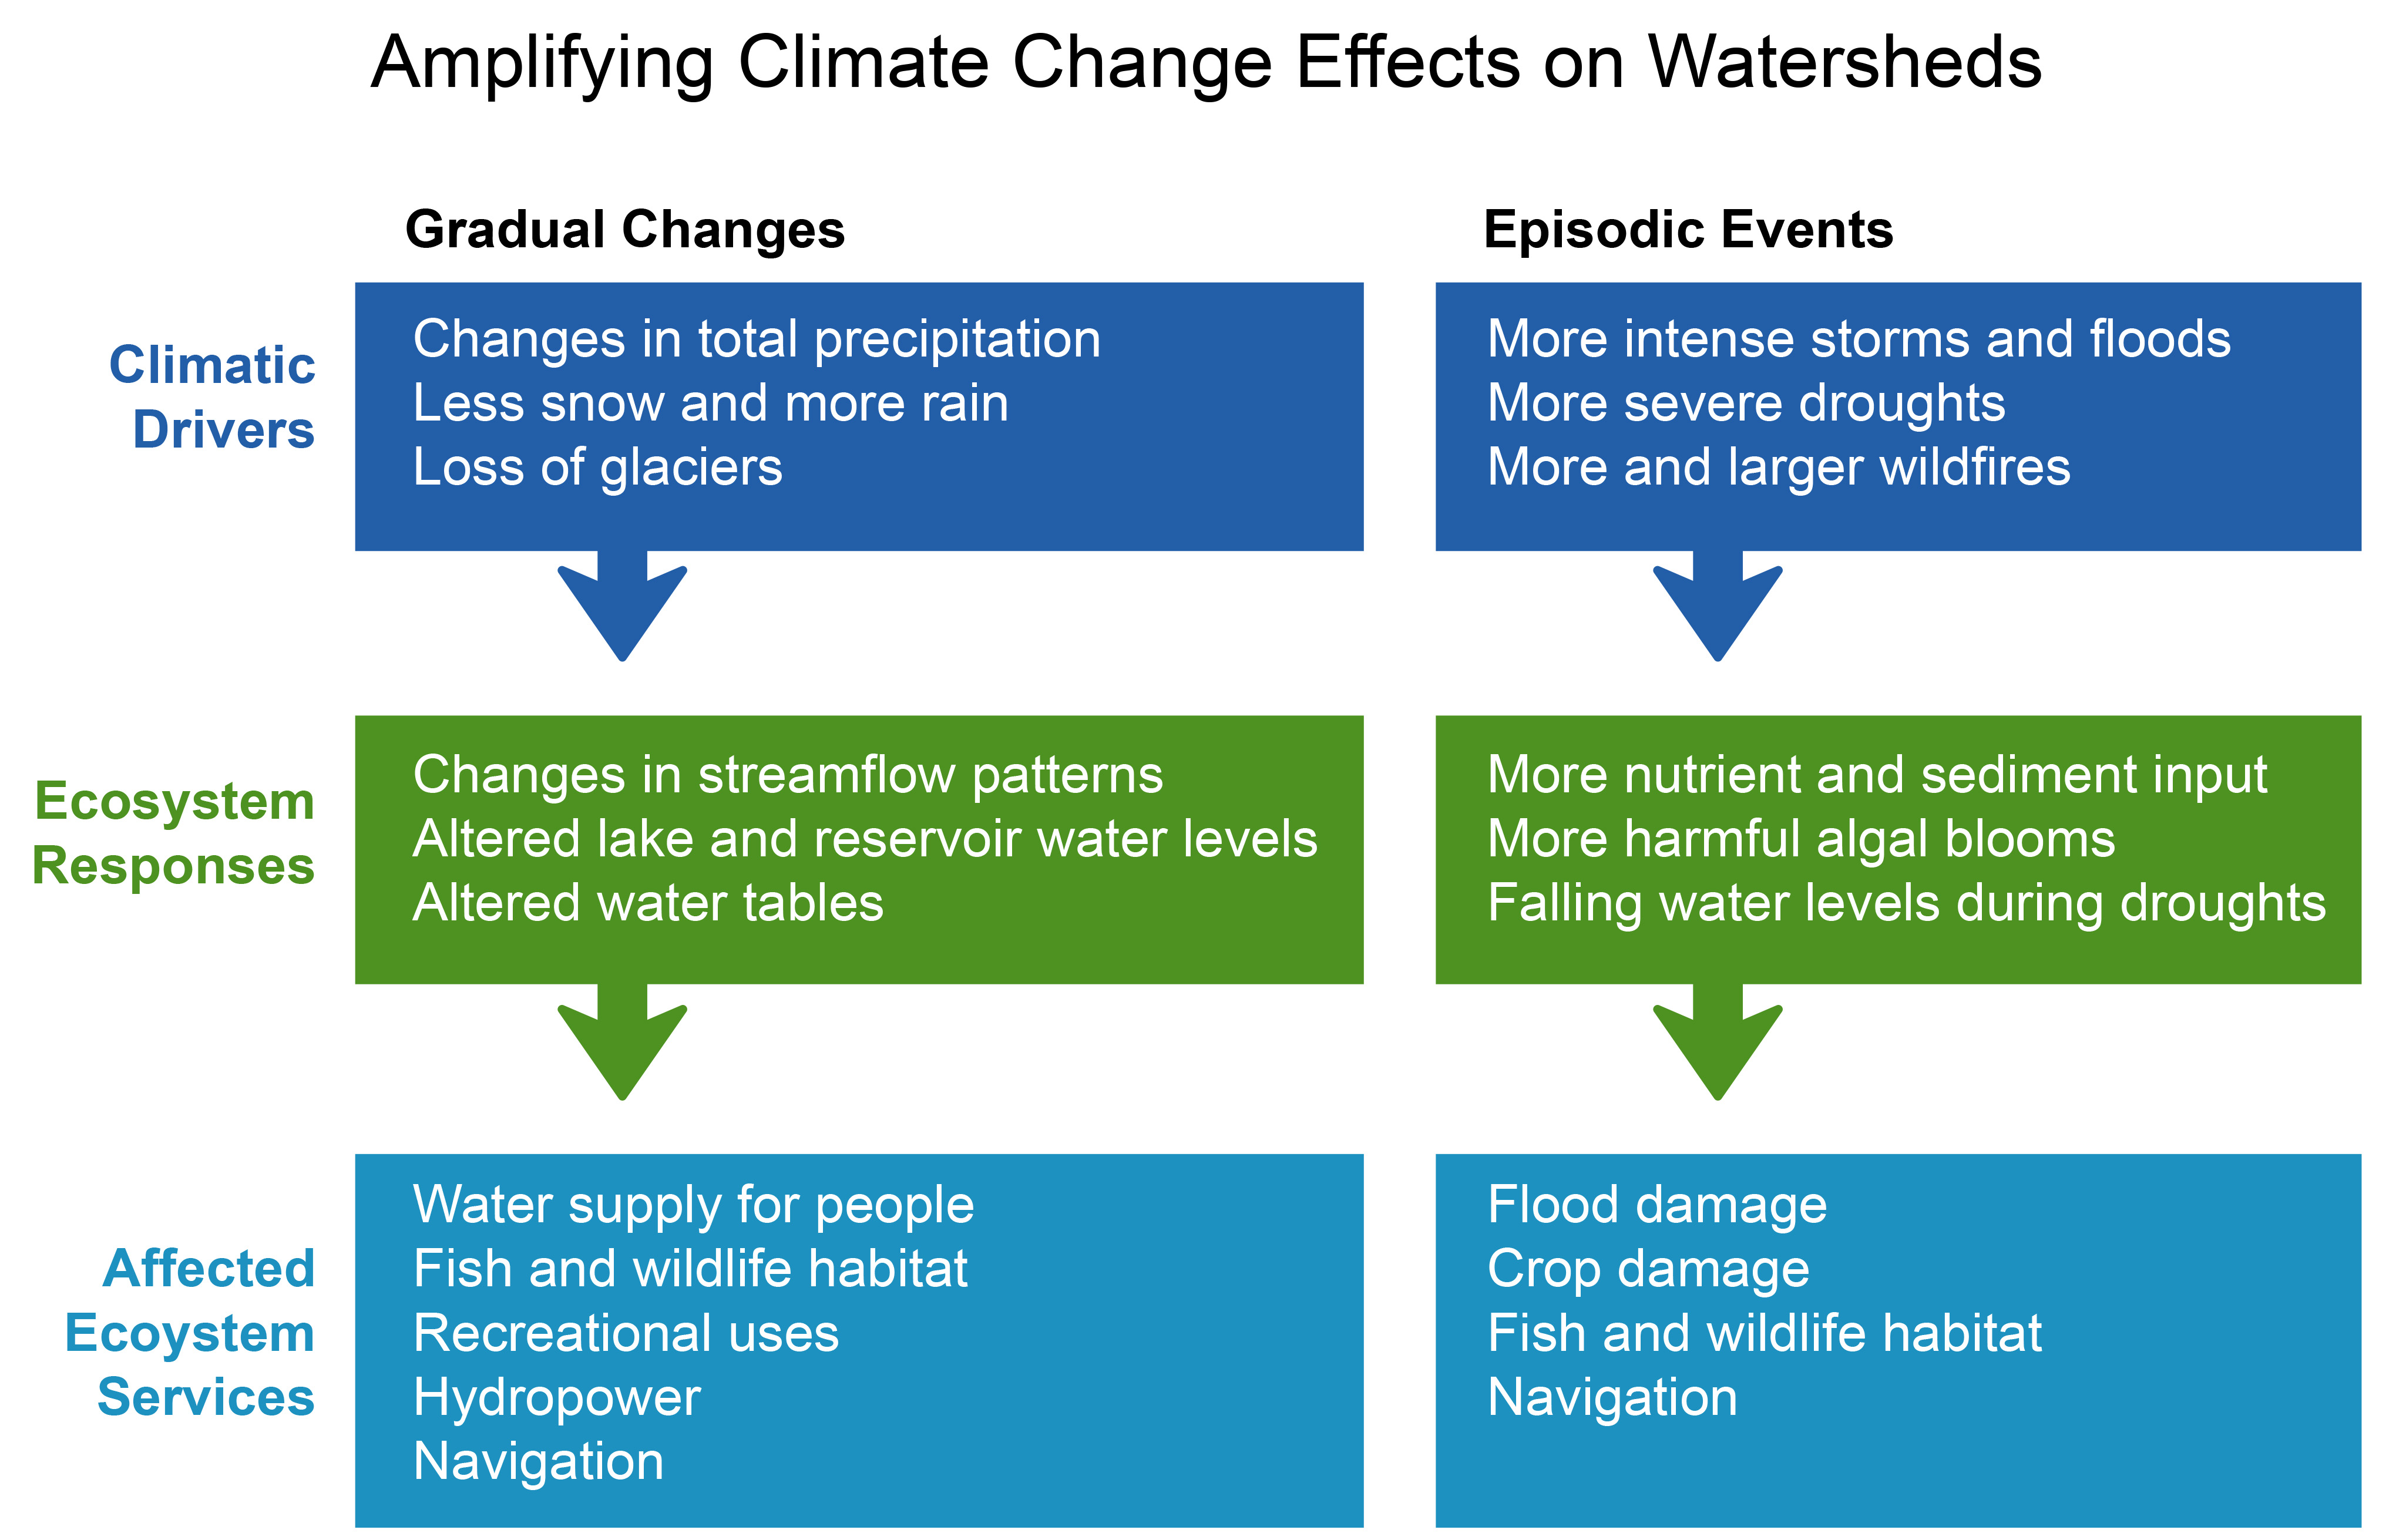 Amplifying Climate Change Effects on Watersheds